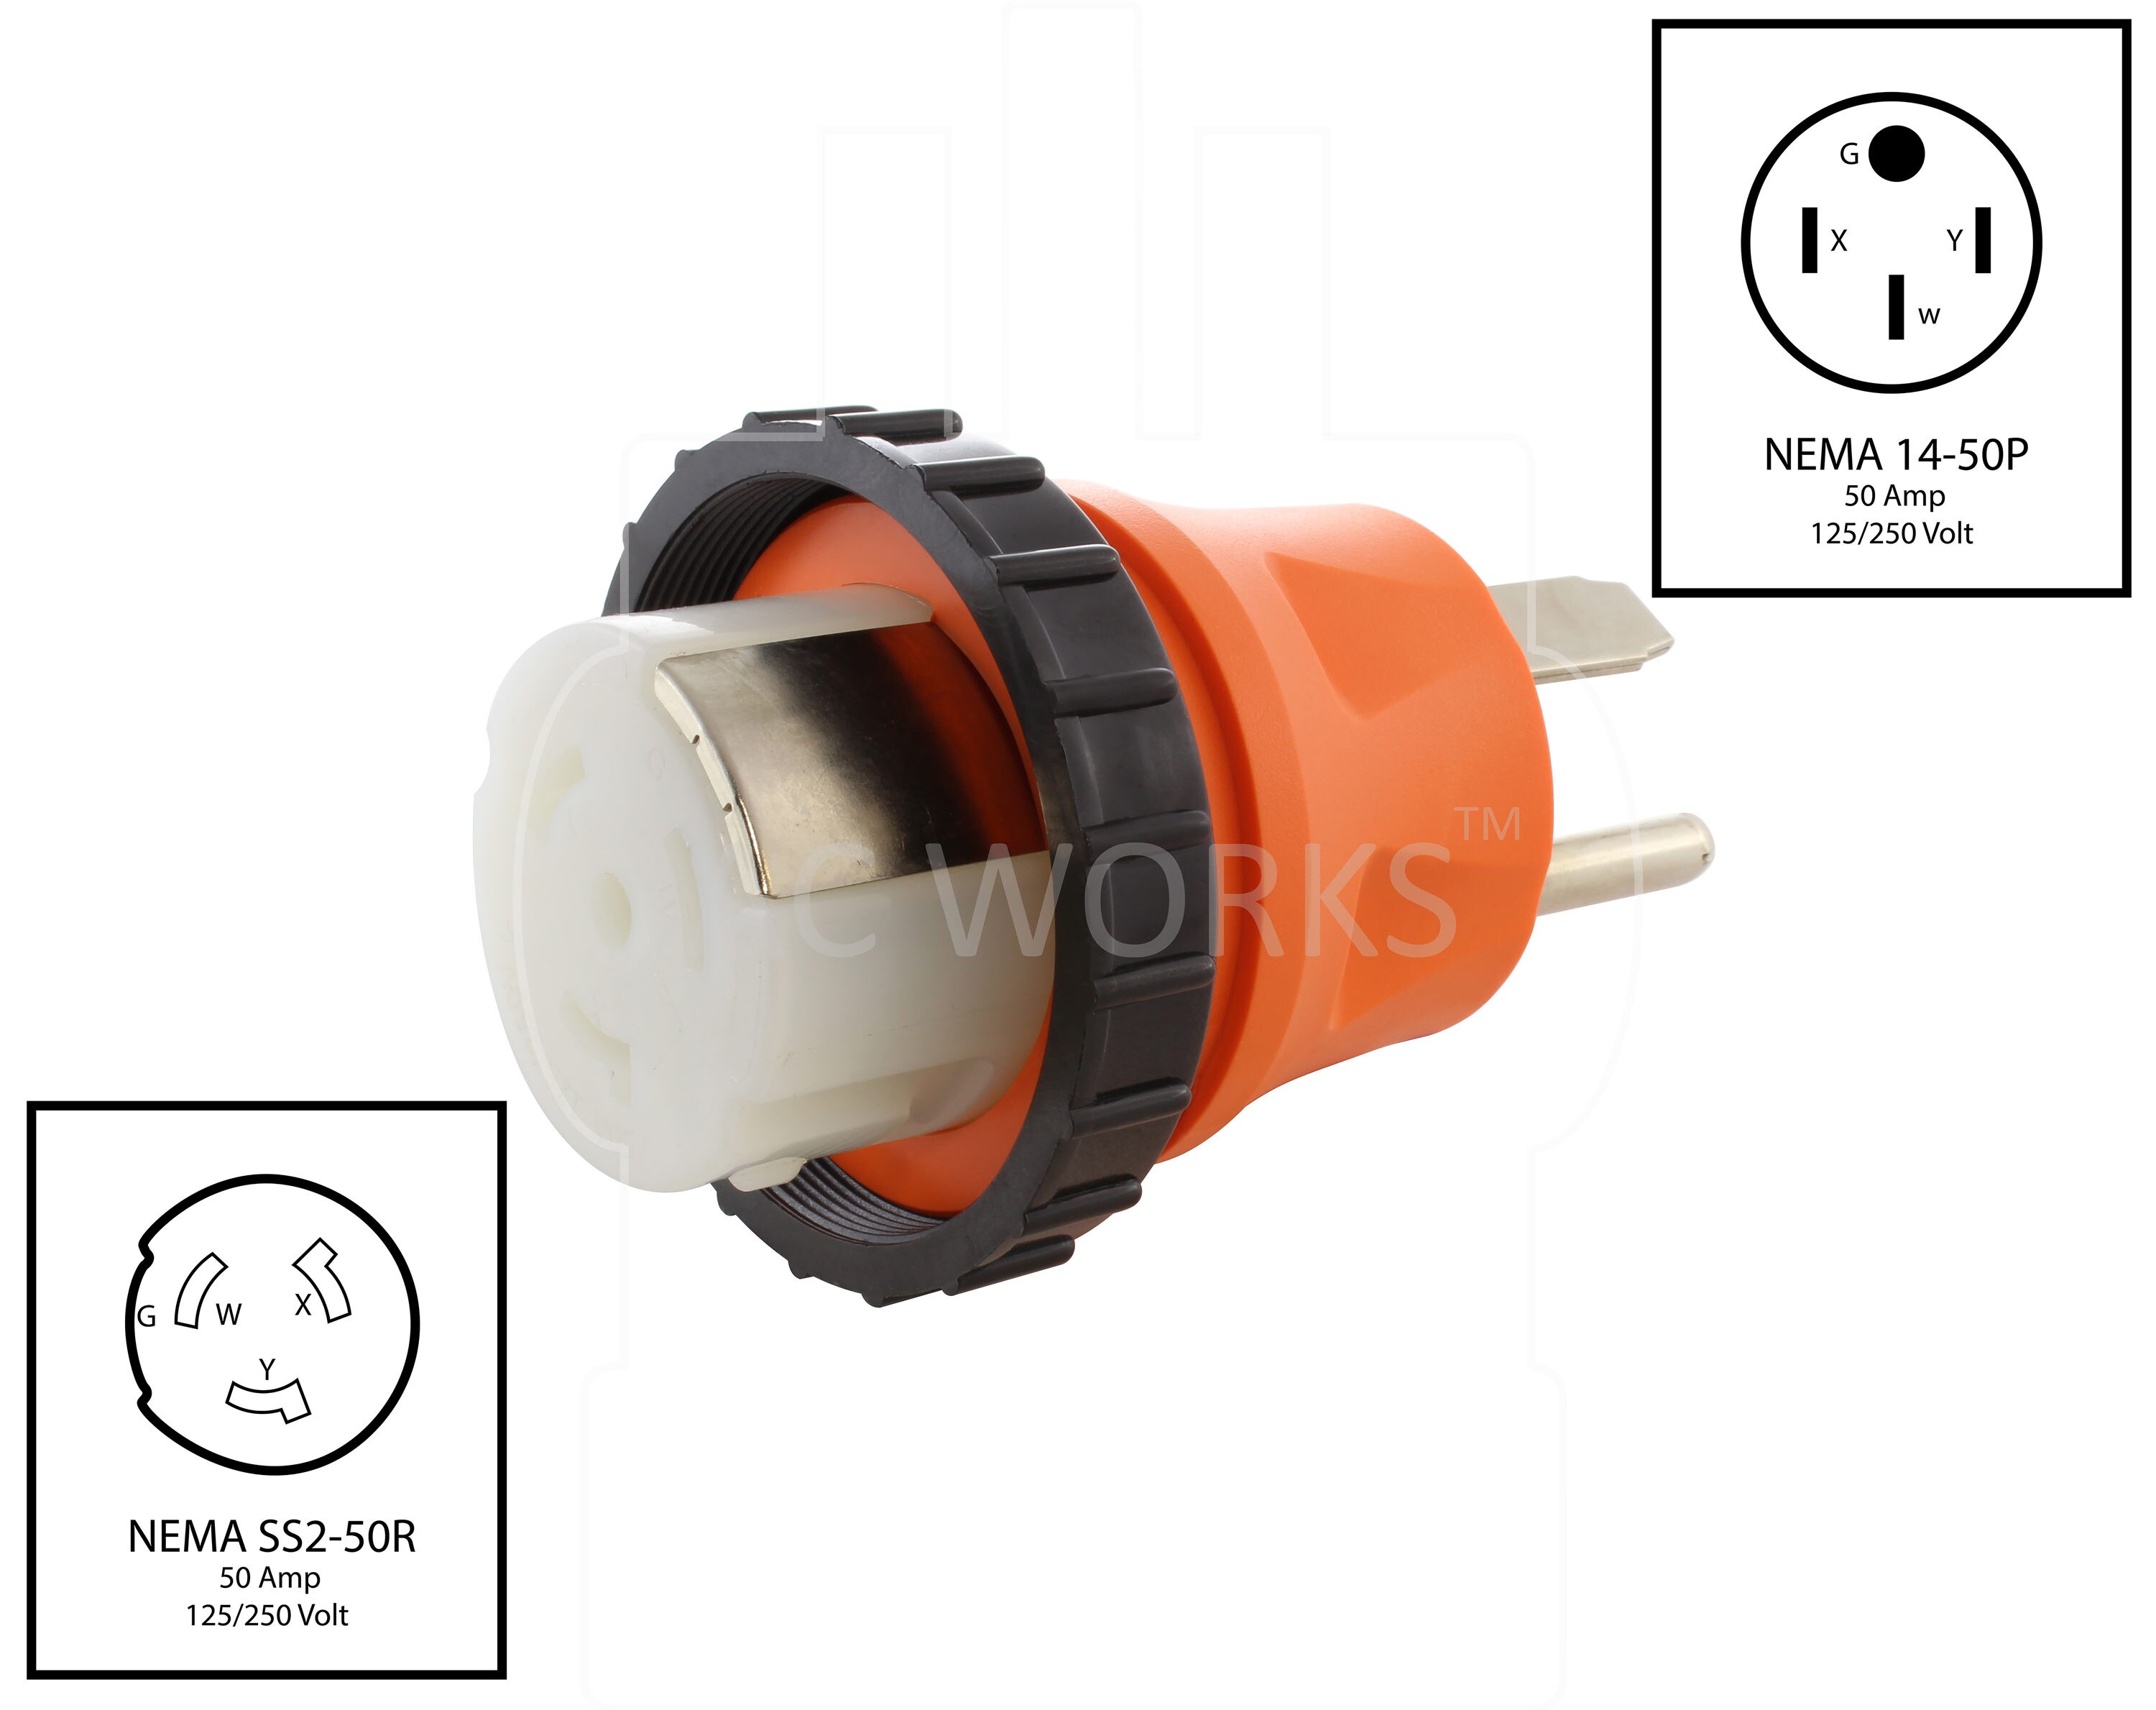 50 Amp 125/250 Volt NEMA SS2-50R Locking Female Connector Assembly by AC WORKS® 